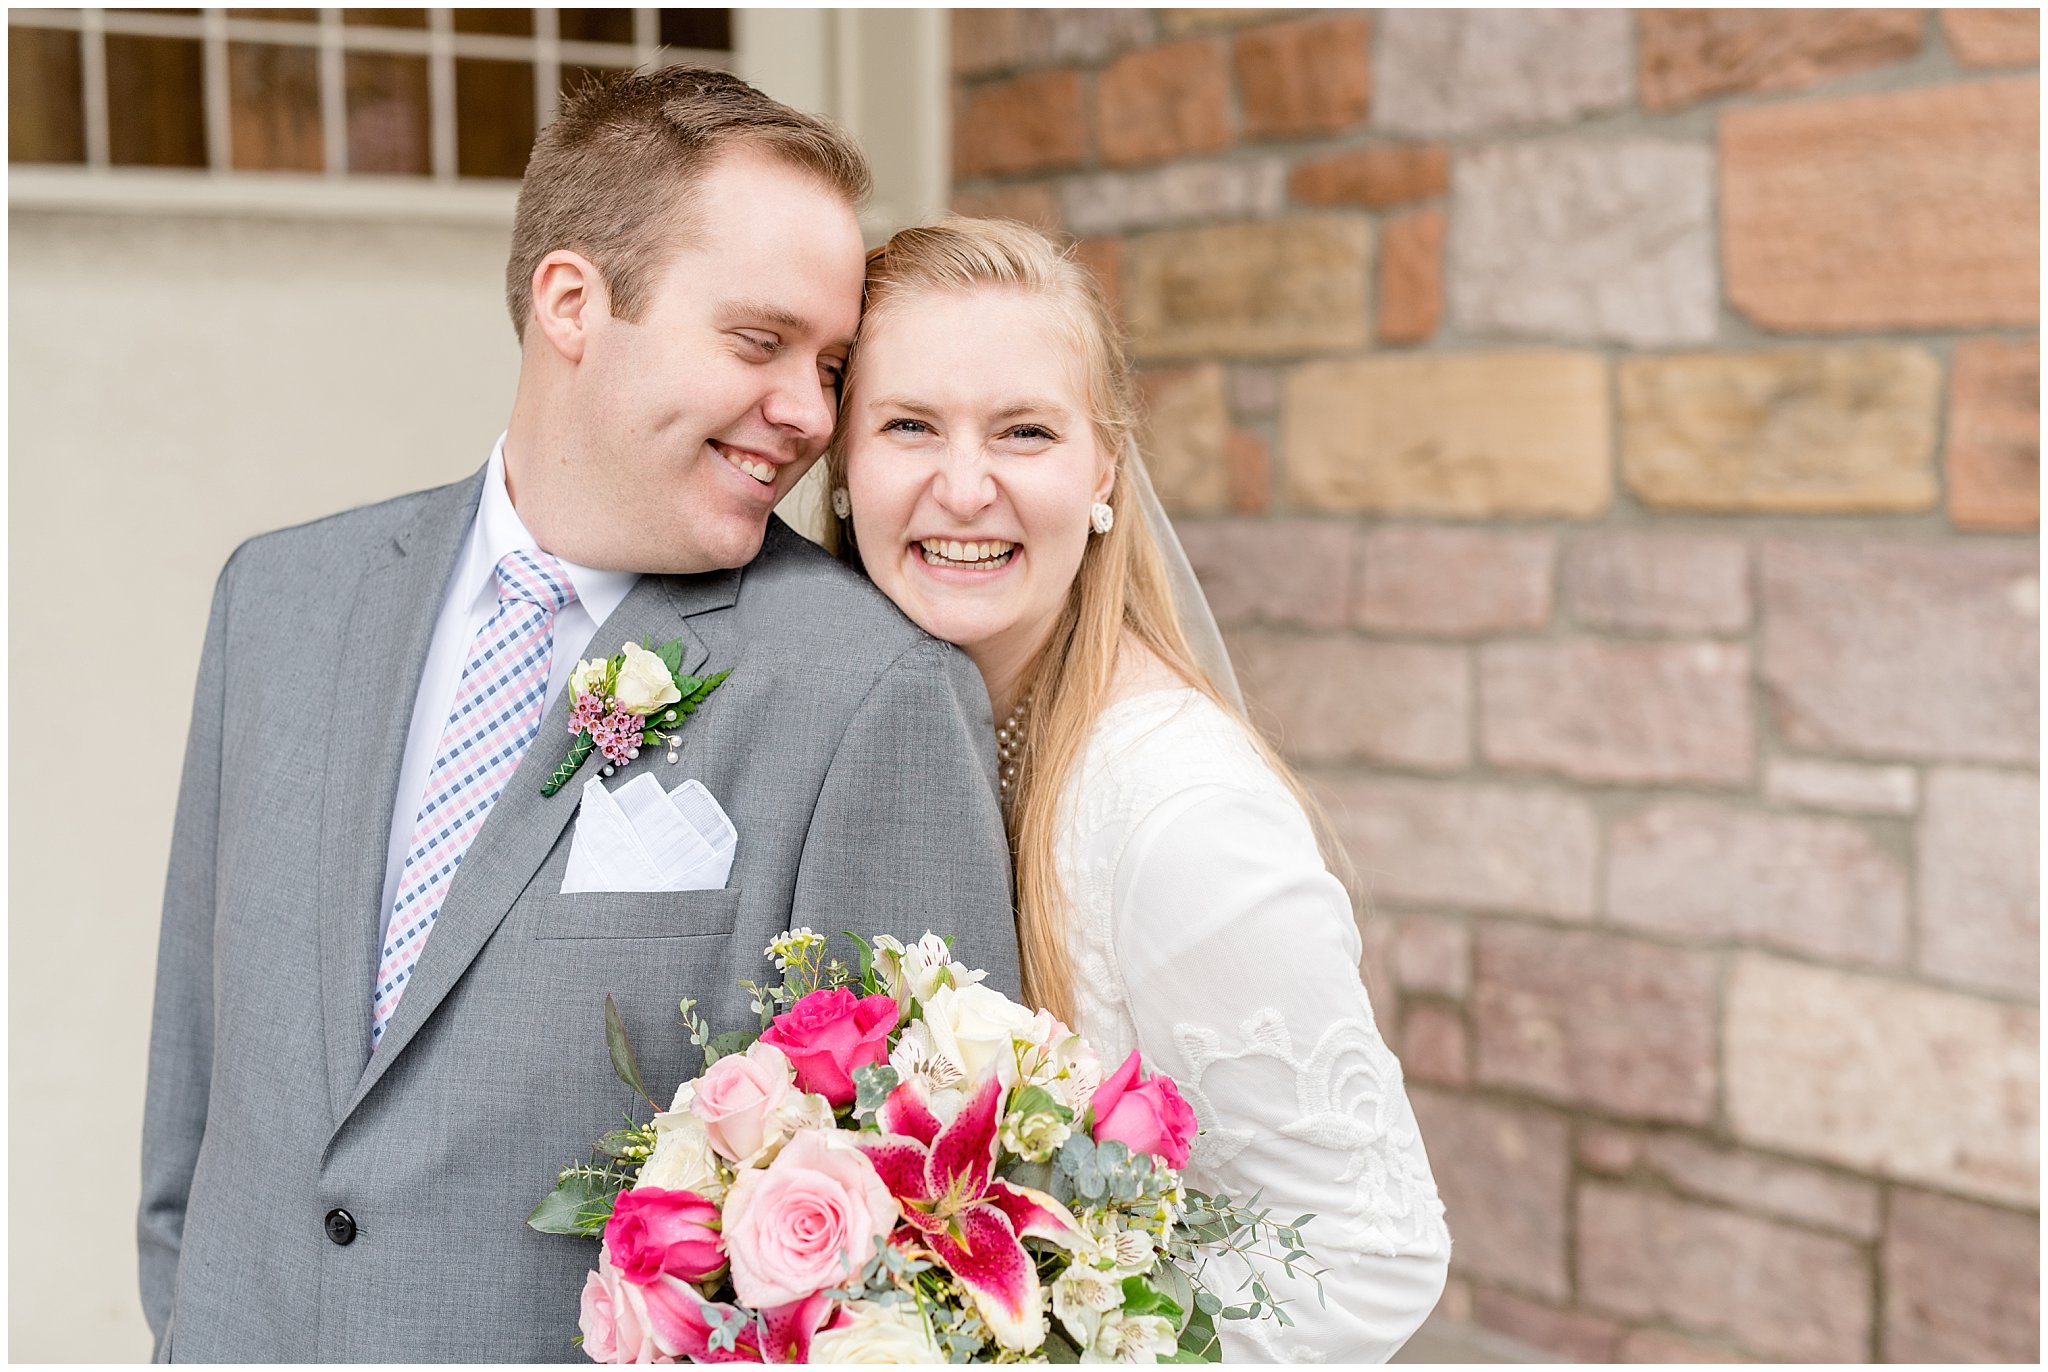 Salt Lake Temple wedding | Bride and groom with pink flowers | Jessie and Dallin Photography